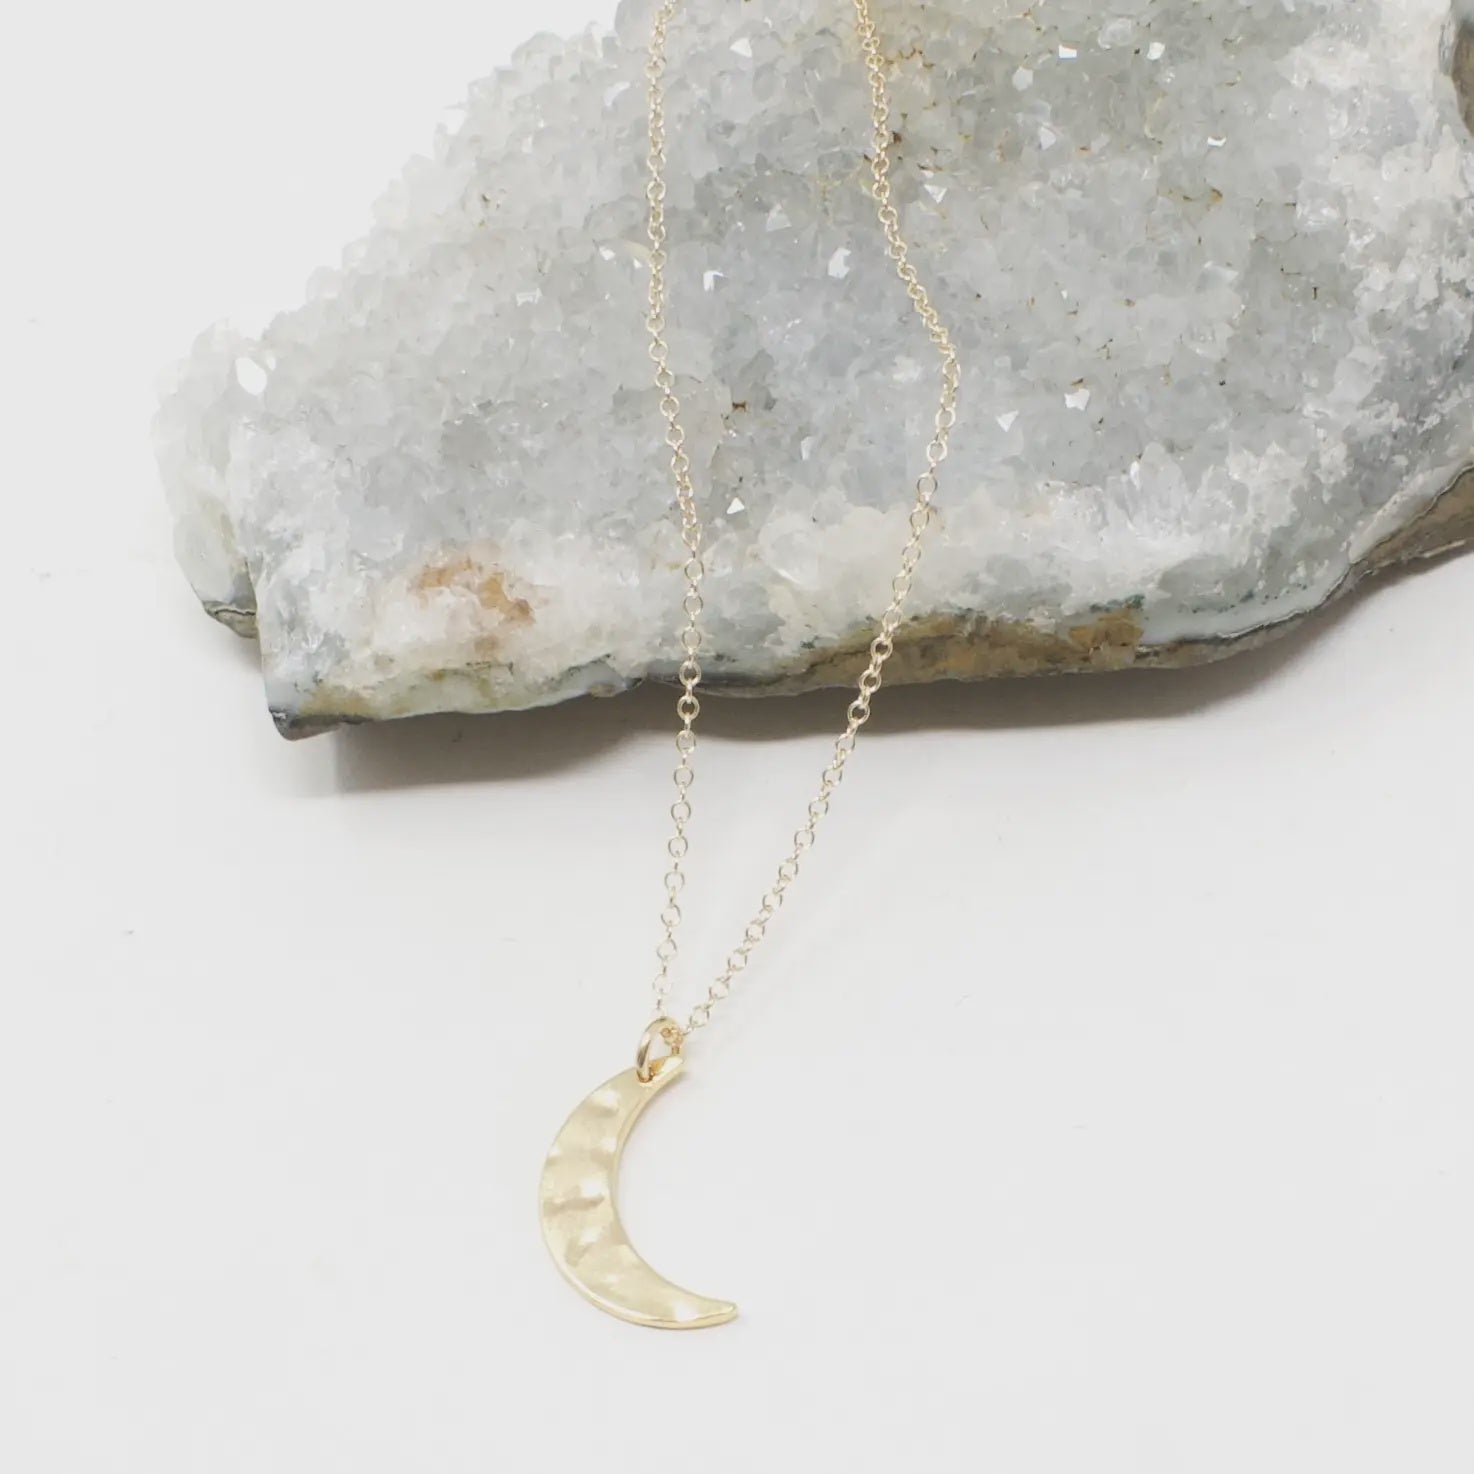 The Hammered Crescent Moon Necklace